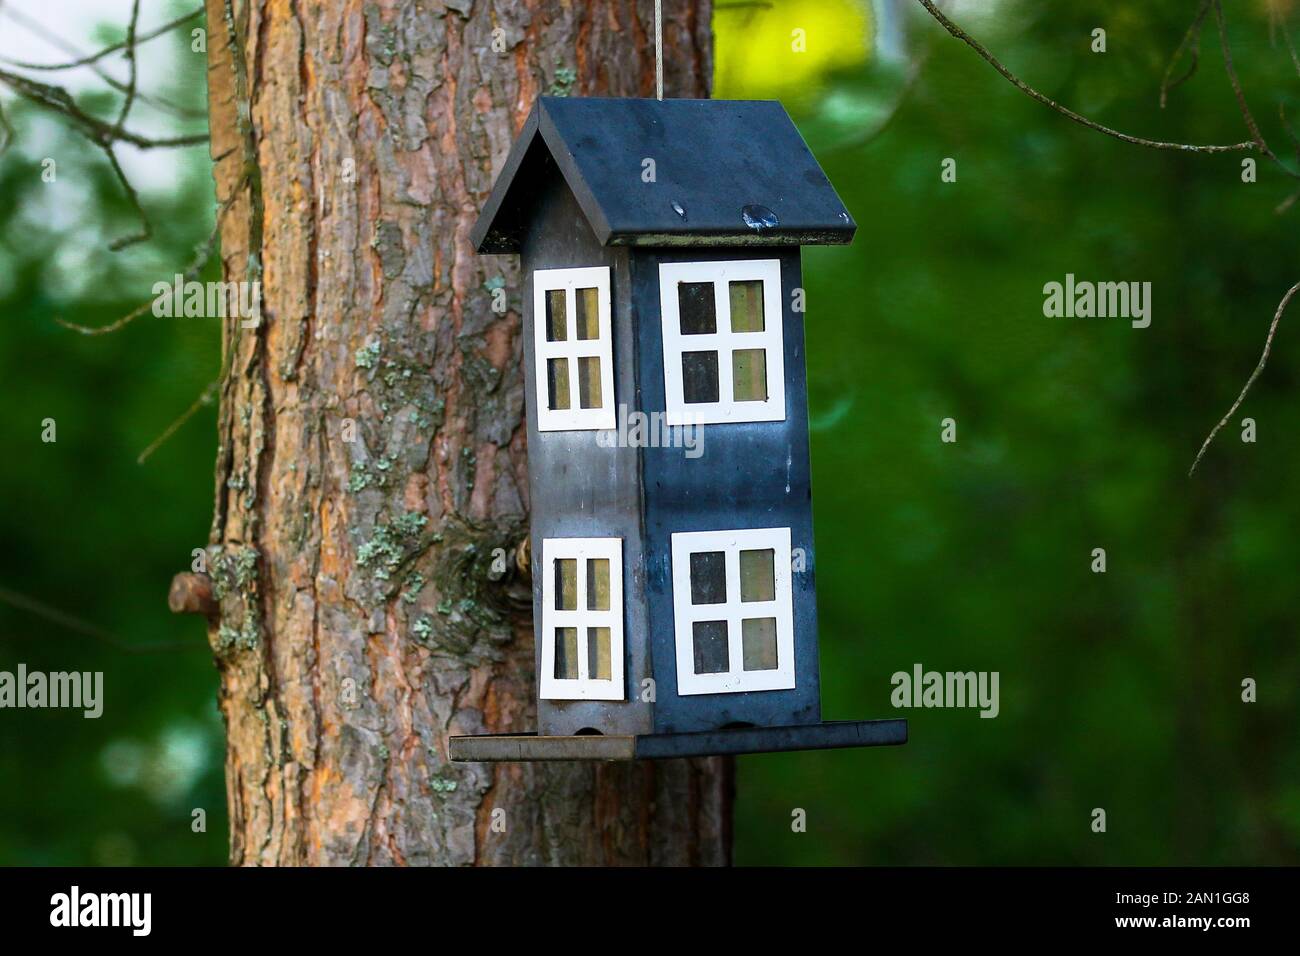 Self made birdhouse hanging from pine tree in Finnish summer evening Stock Photo